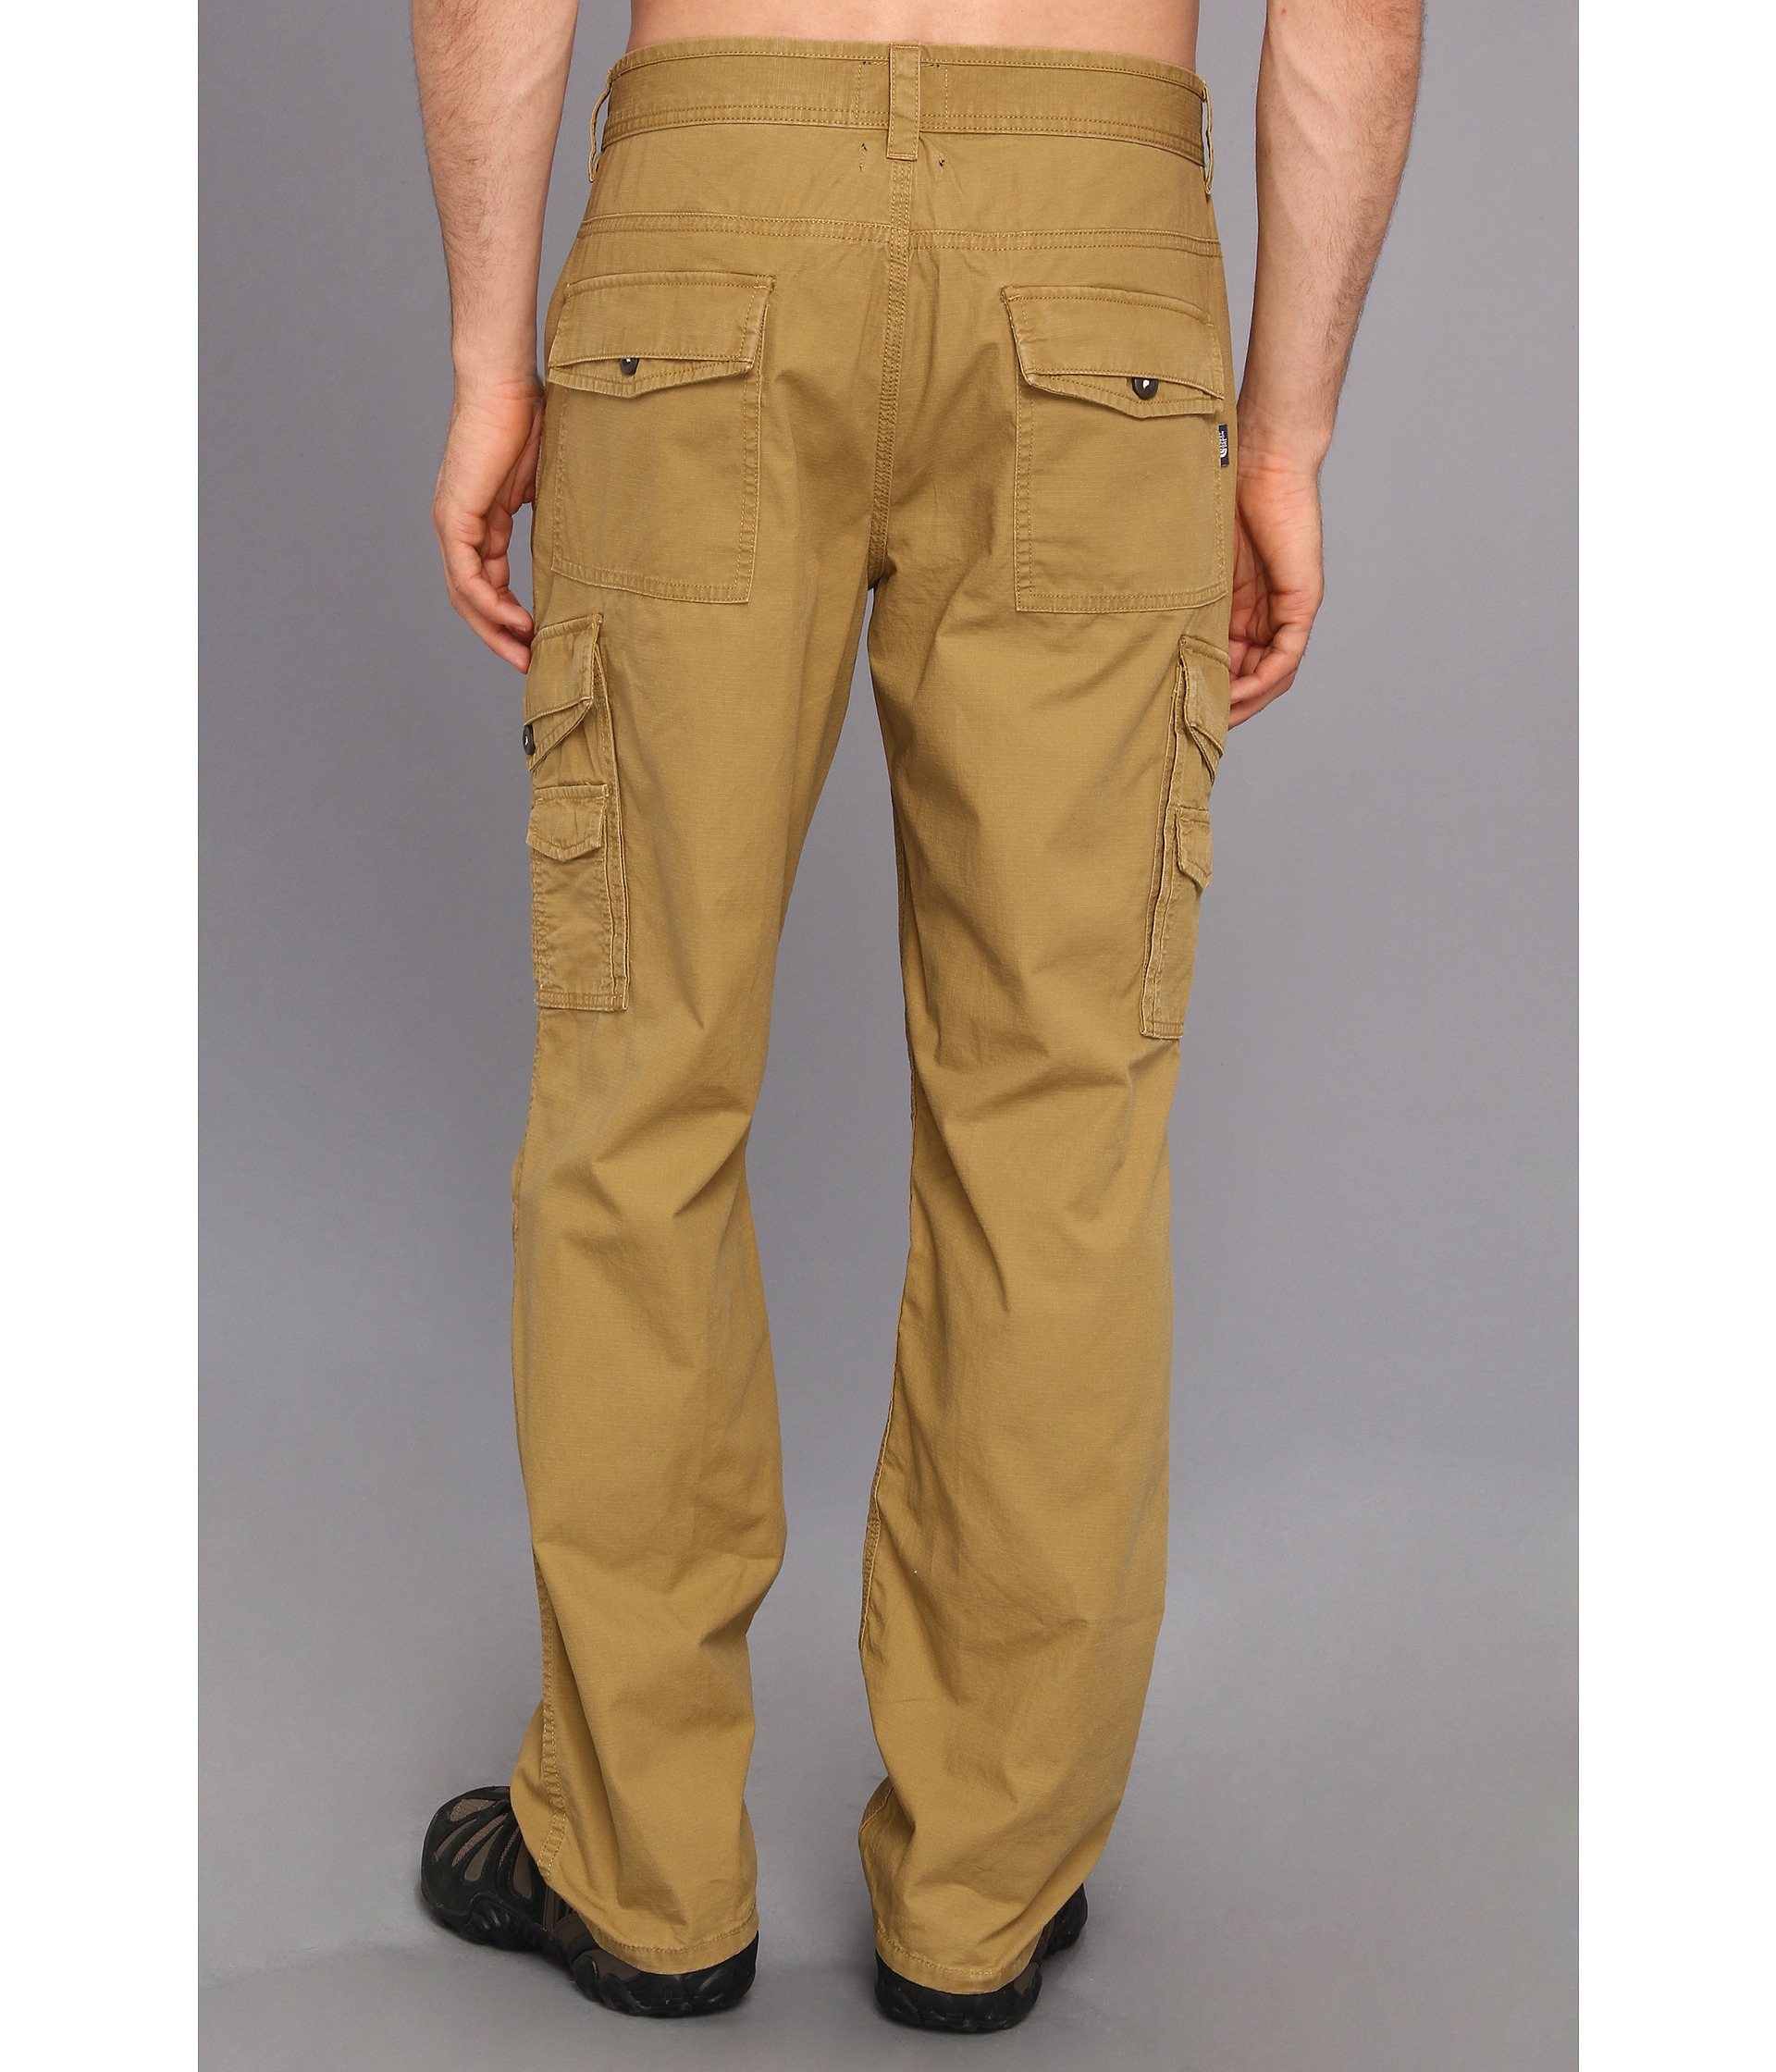 Lyst - The North Face Arroyo Cargo Pant in Natural for Men